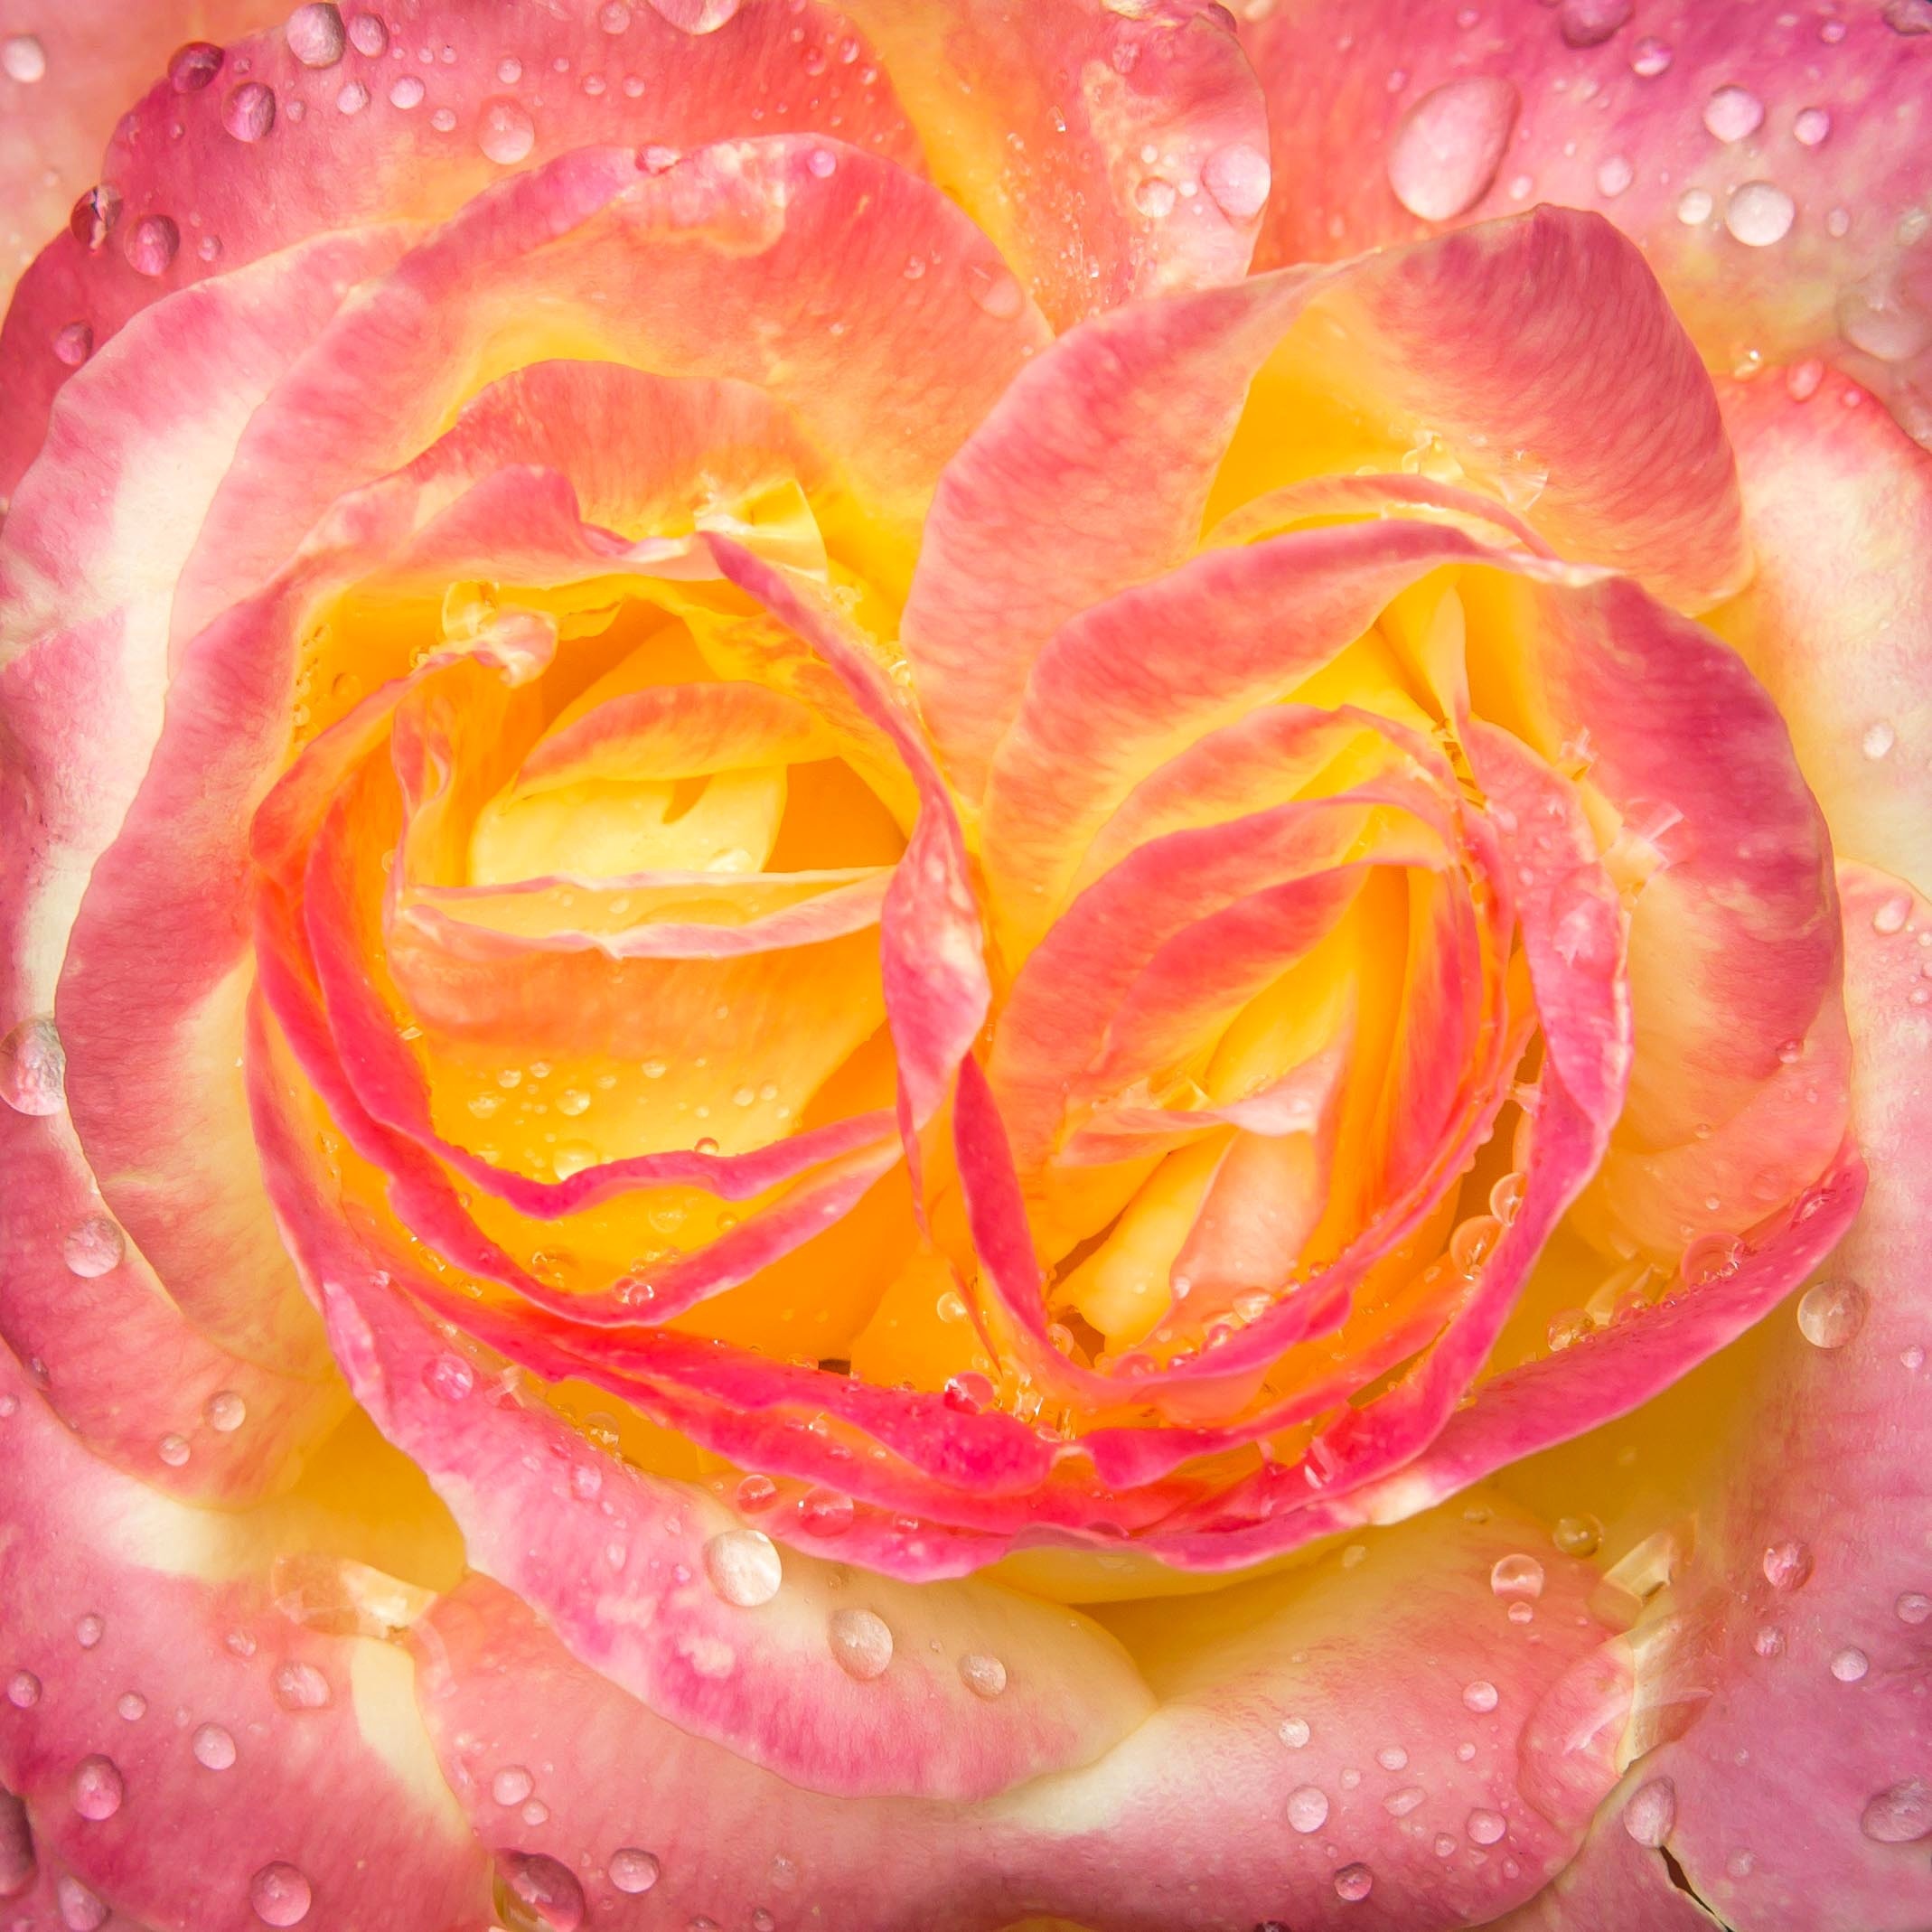 yellow-white-and-pink flower with water droplets